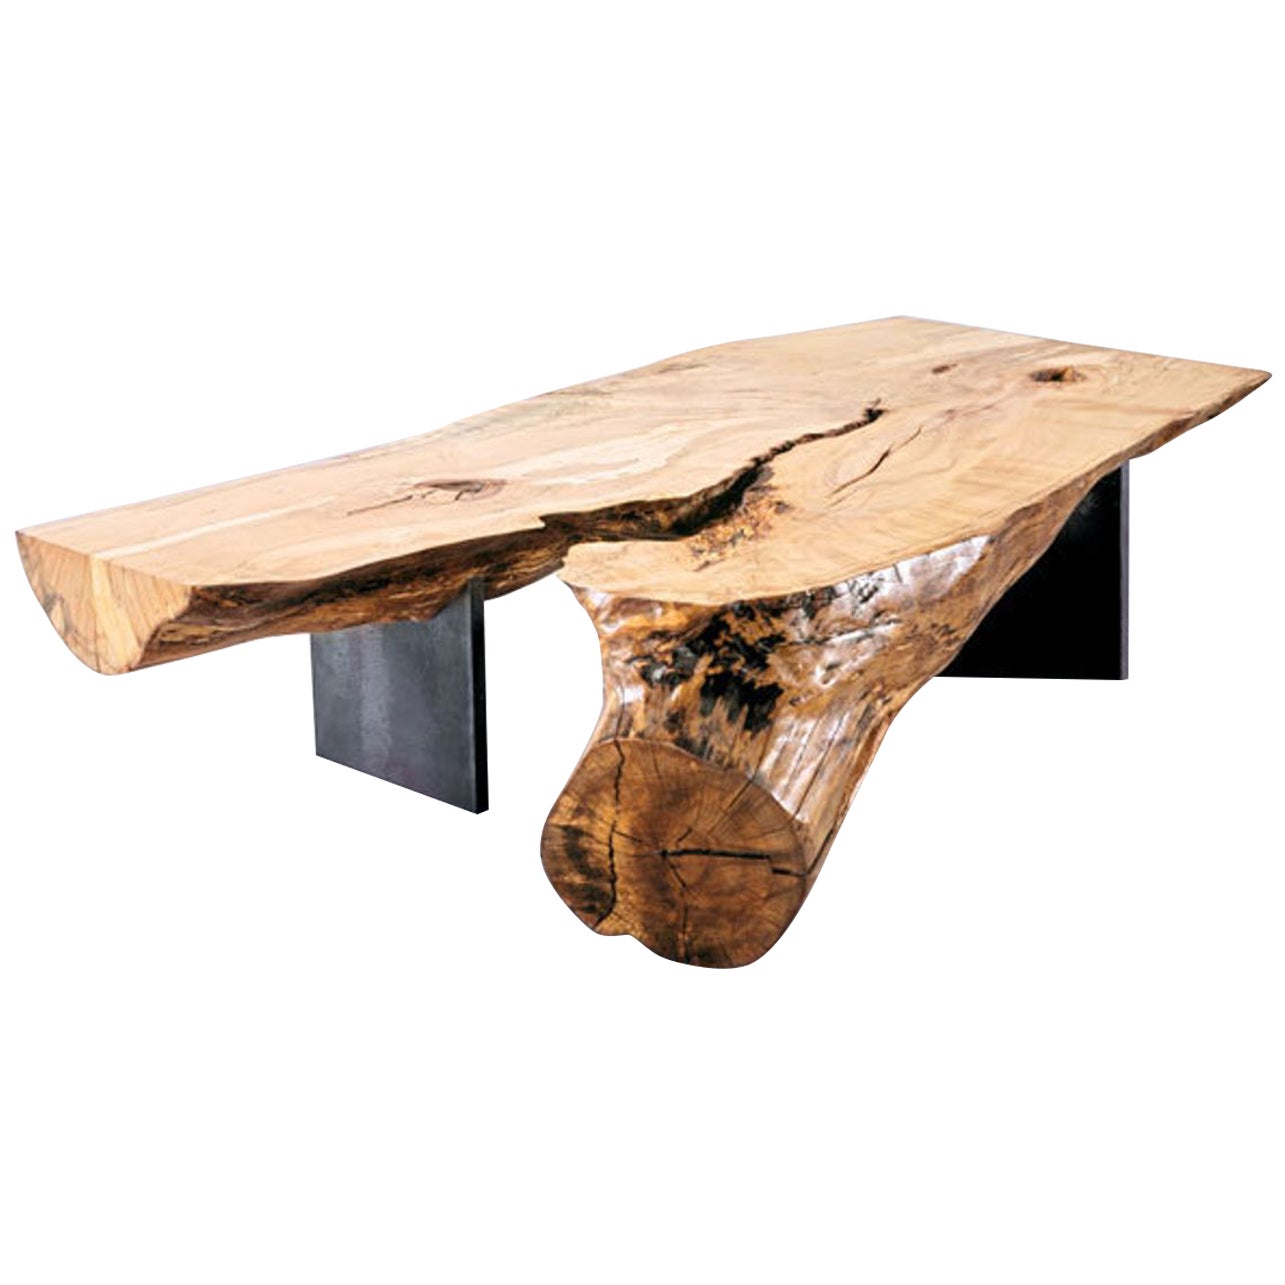 Organic Spalted Maple Round back steel leg Low Table / Bench